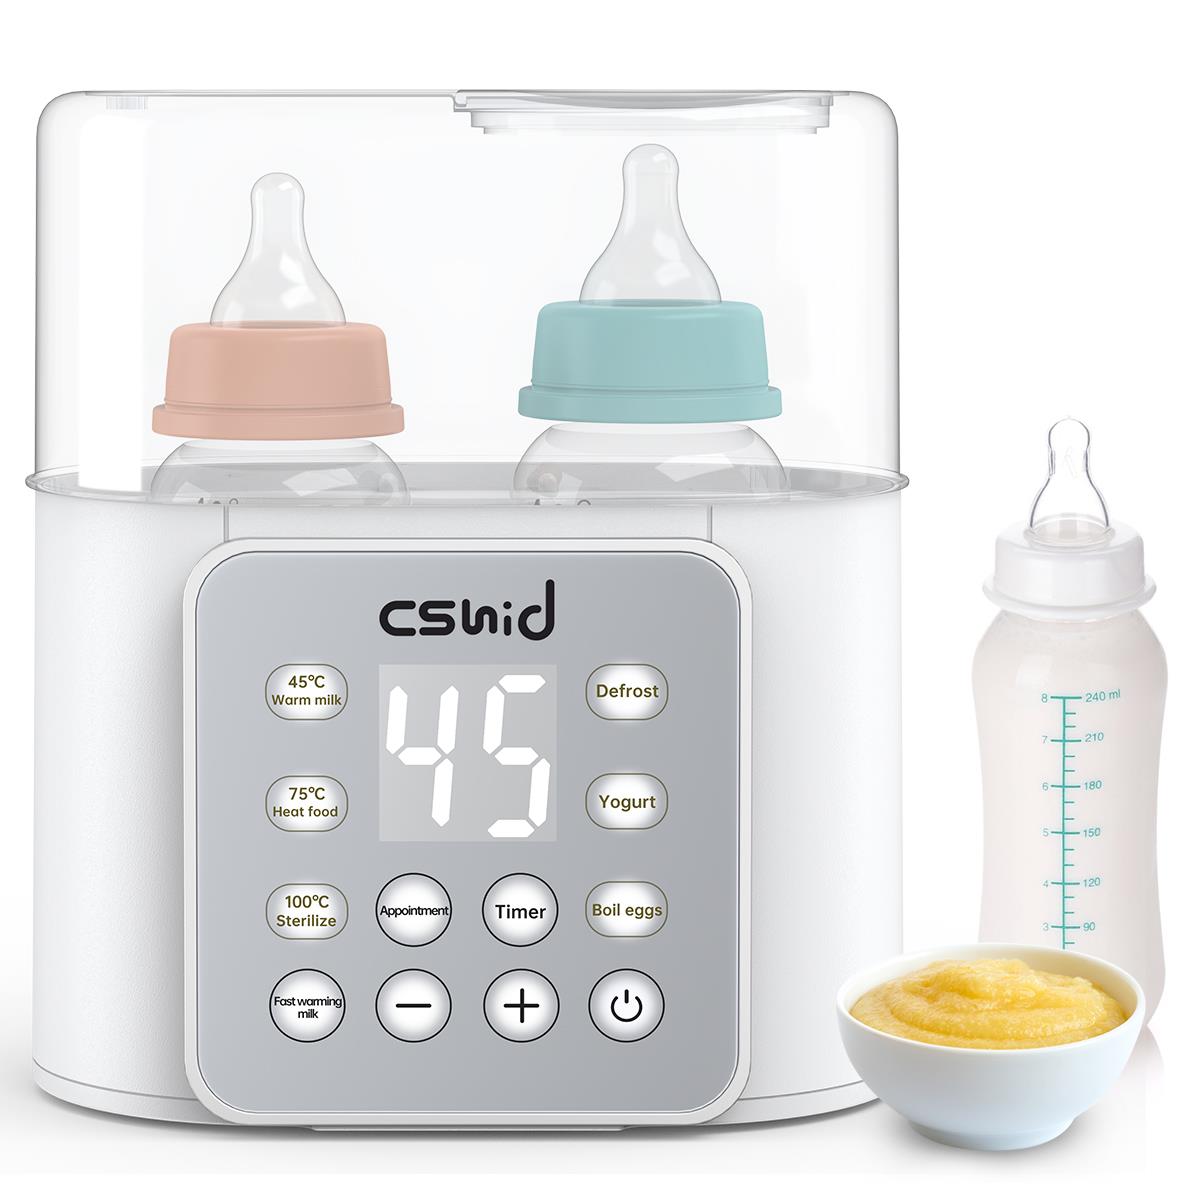 Baby Bottle Warmer, Bottle Sterilizer 9-in-1 Fast Food Heater and DefrostBottle FeedingGPED- combines the latest technologies with over a decade of hardware expertise to design and build solid, reliable consumer electronics